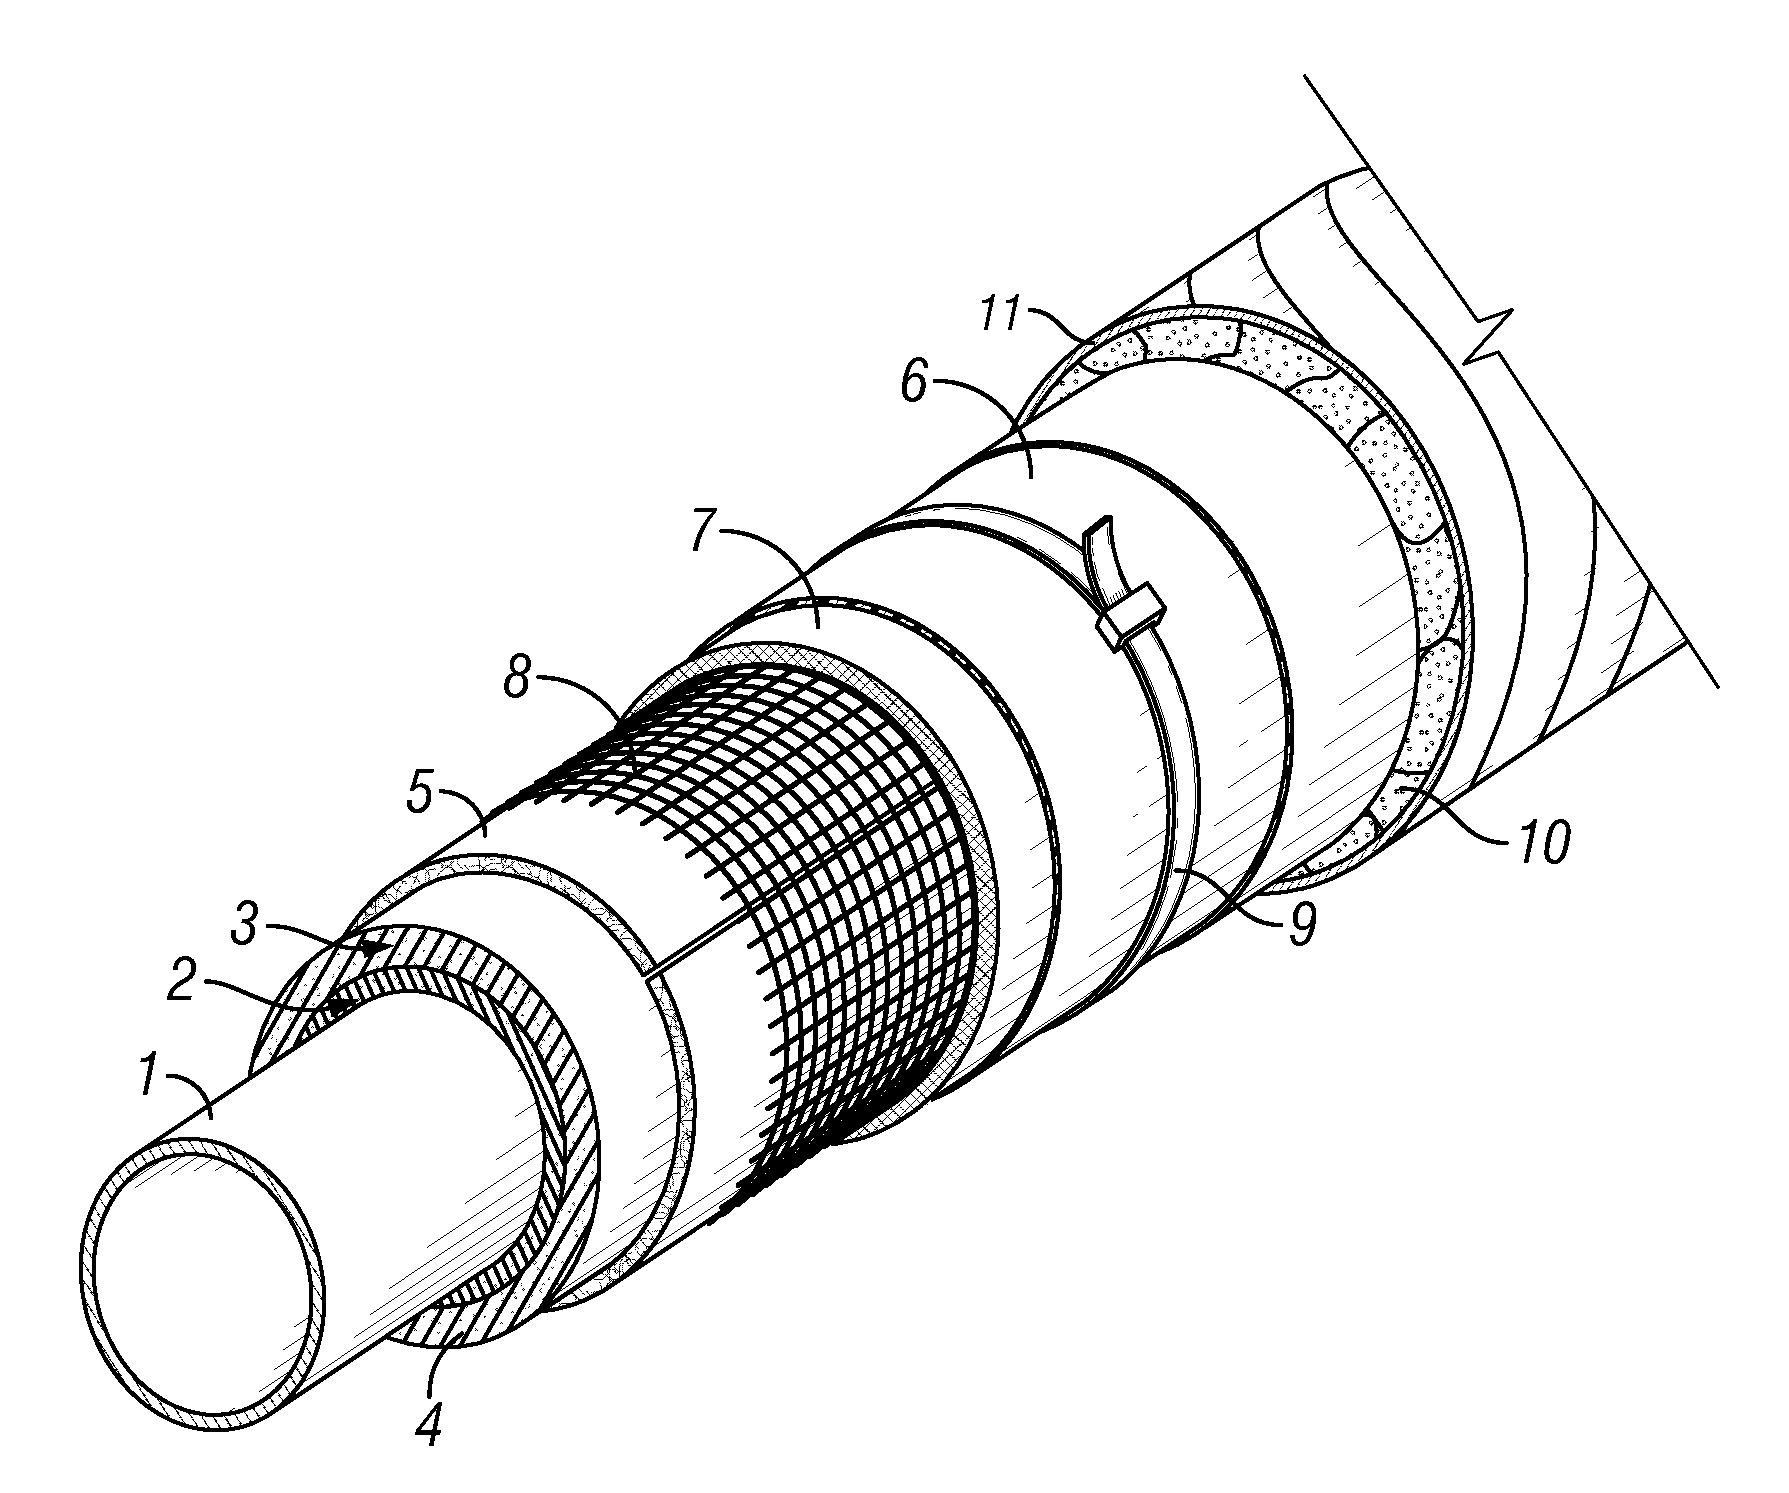 Blast resistant pipe protection system and method